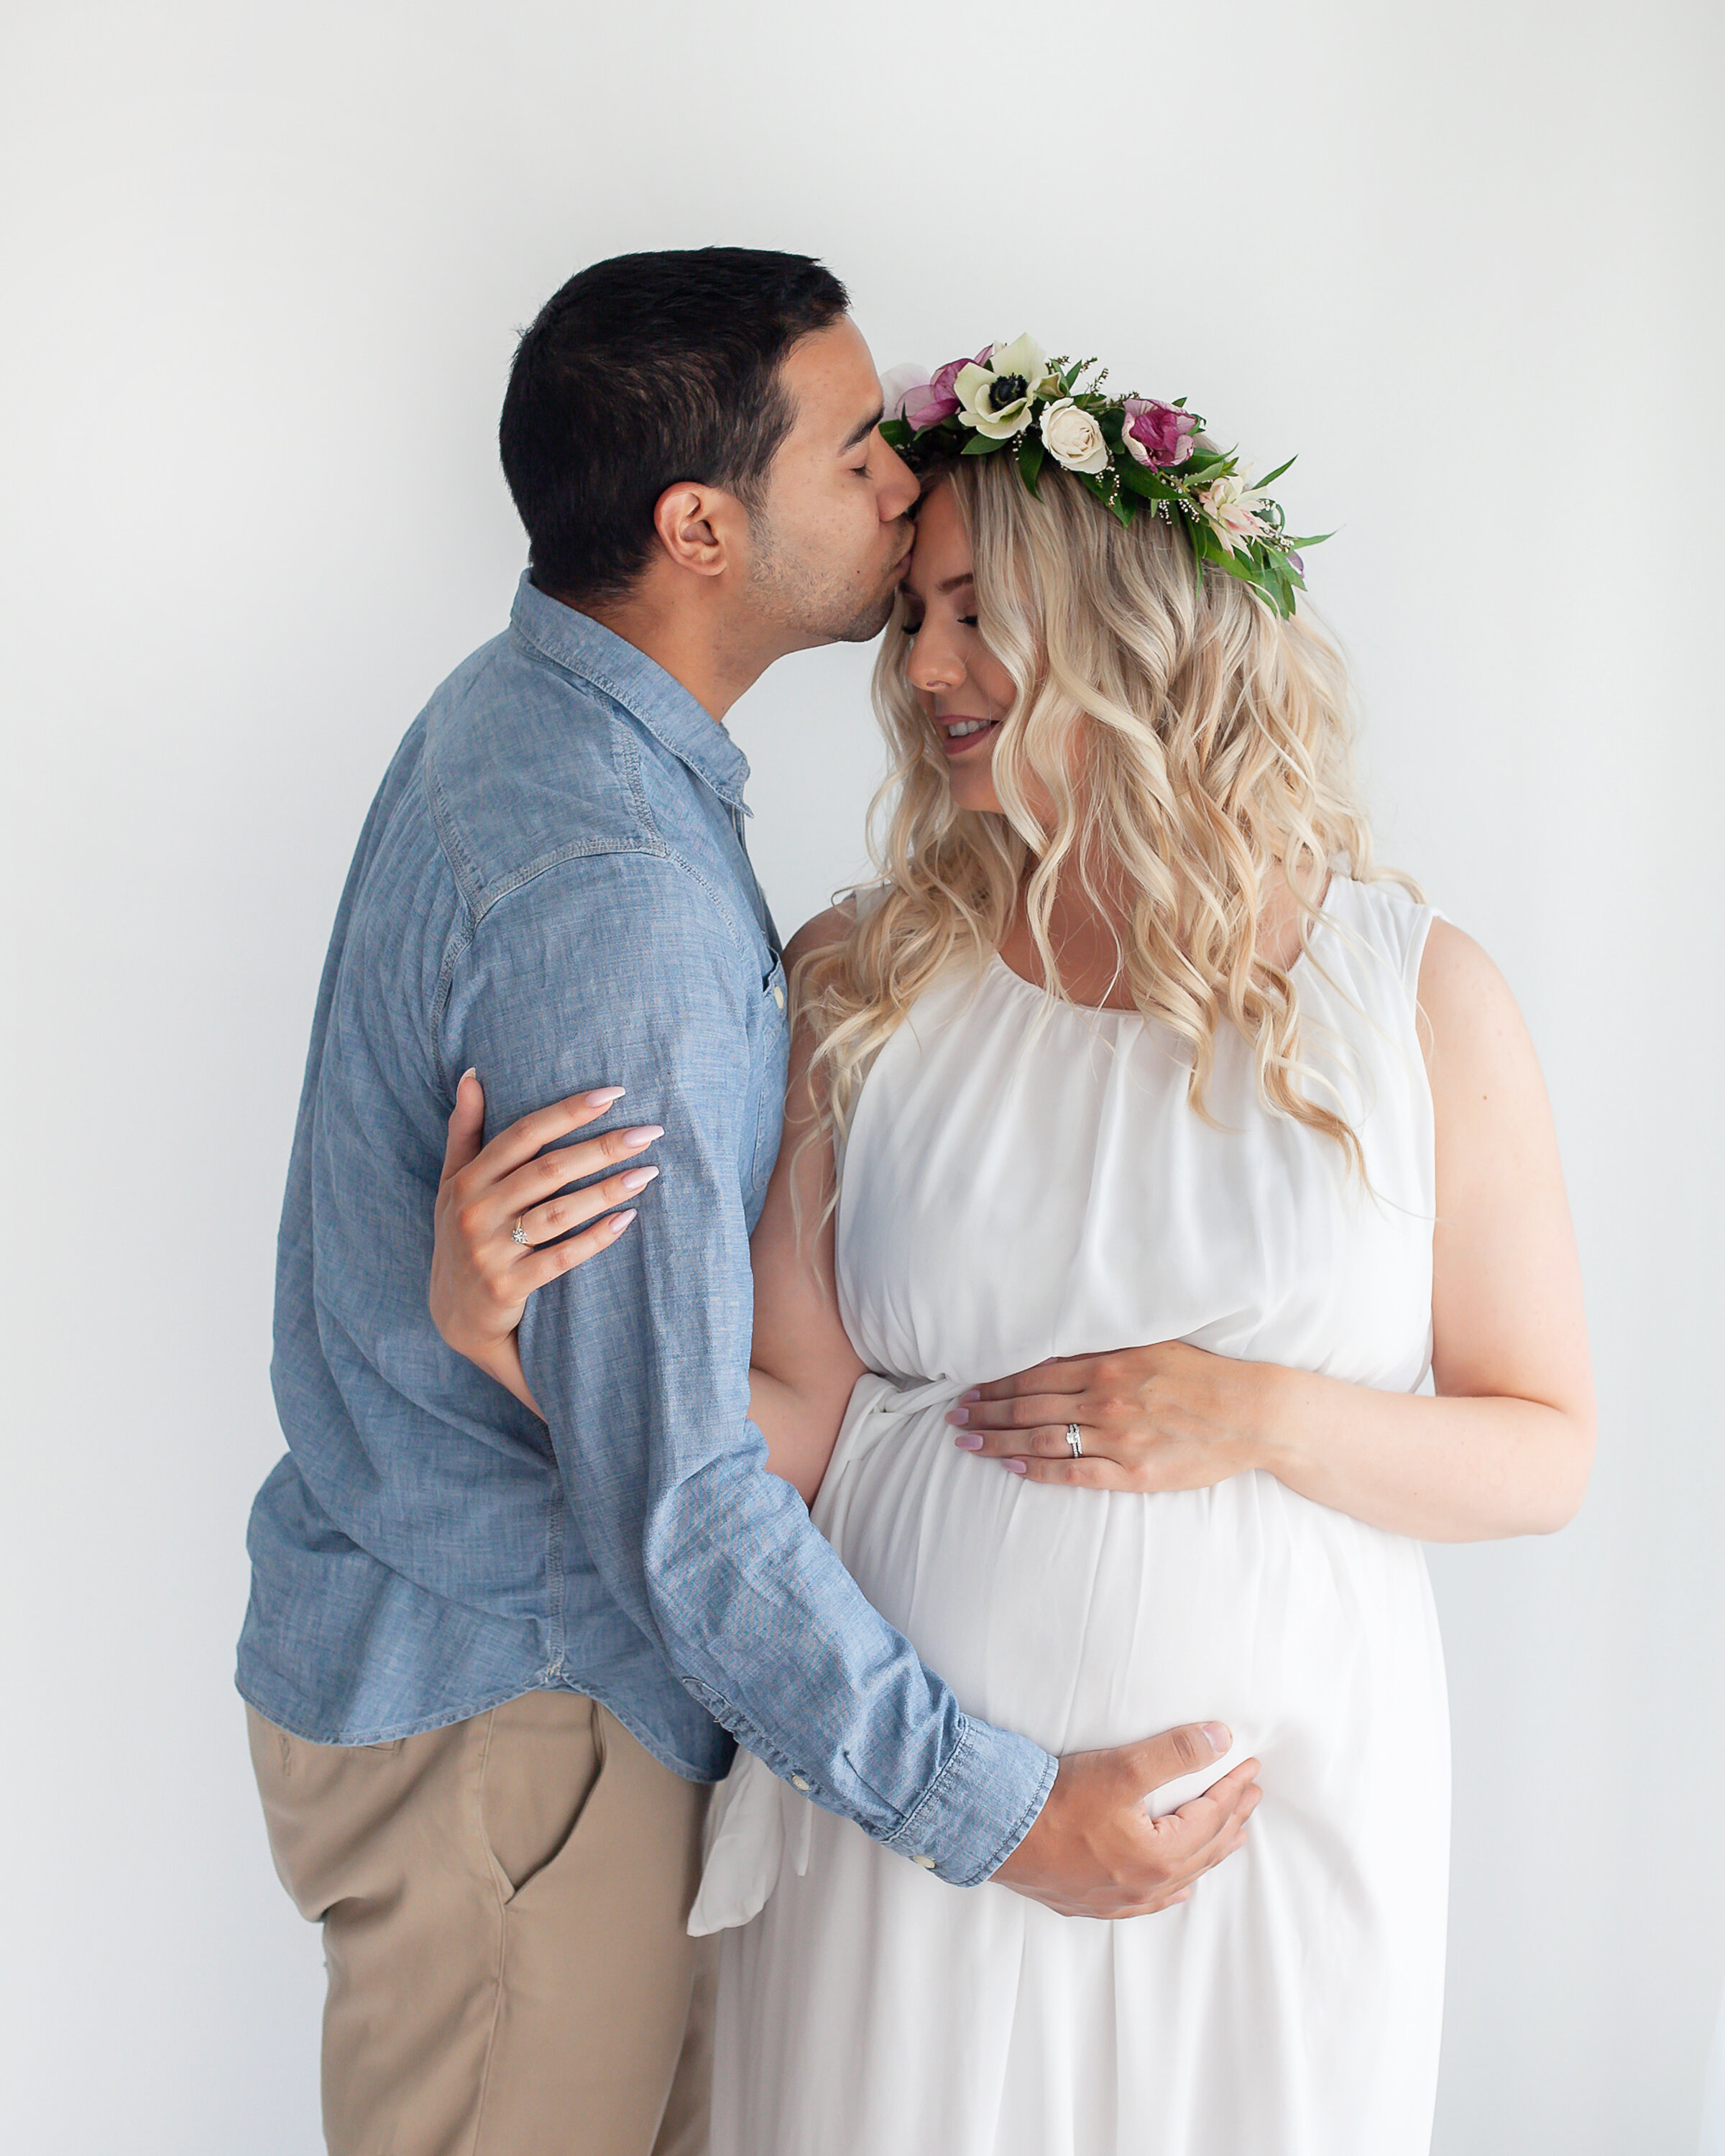 Bowmanville_Couple_Floral_Maternity_Photographer_Petra_King_Photography